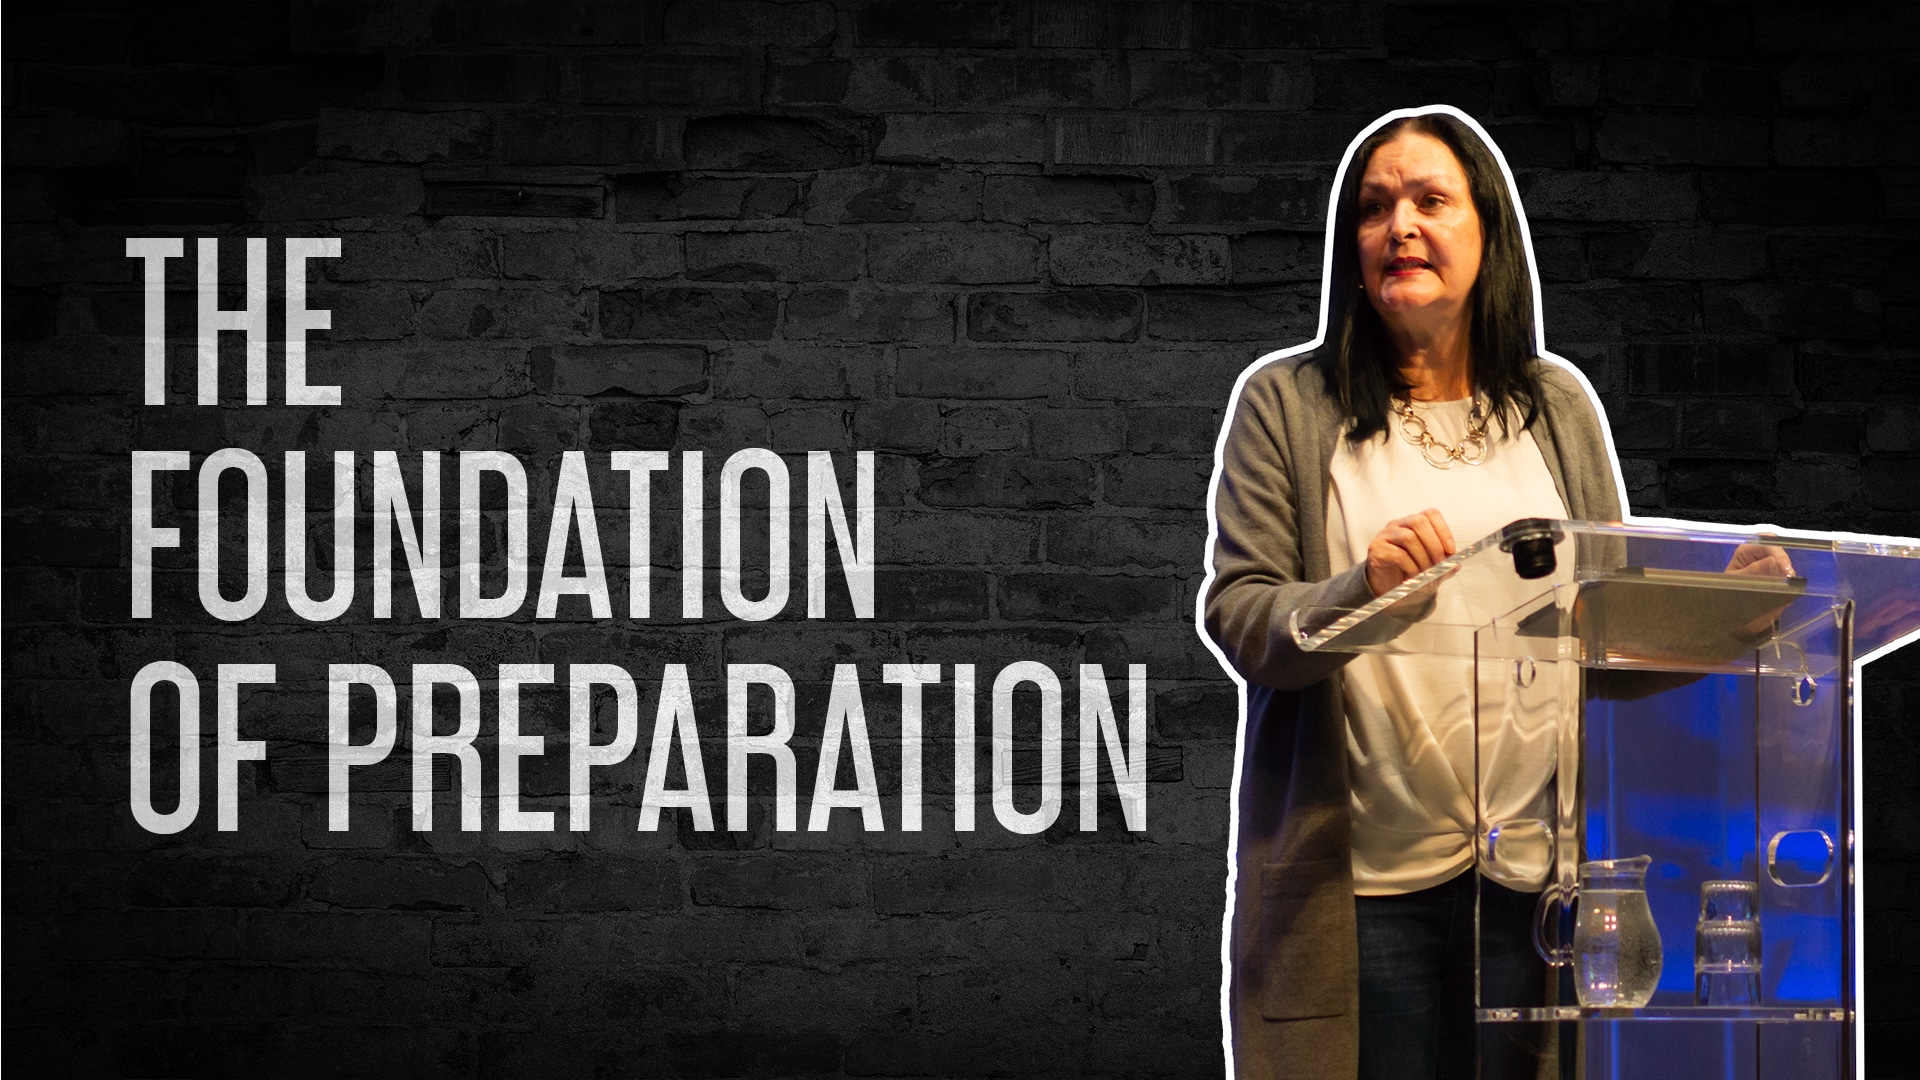 The Foundation of Preparation